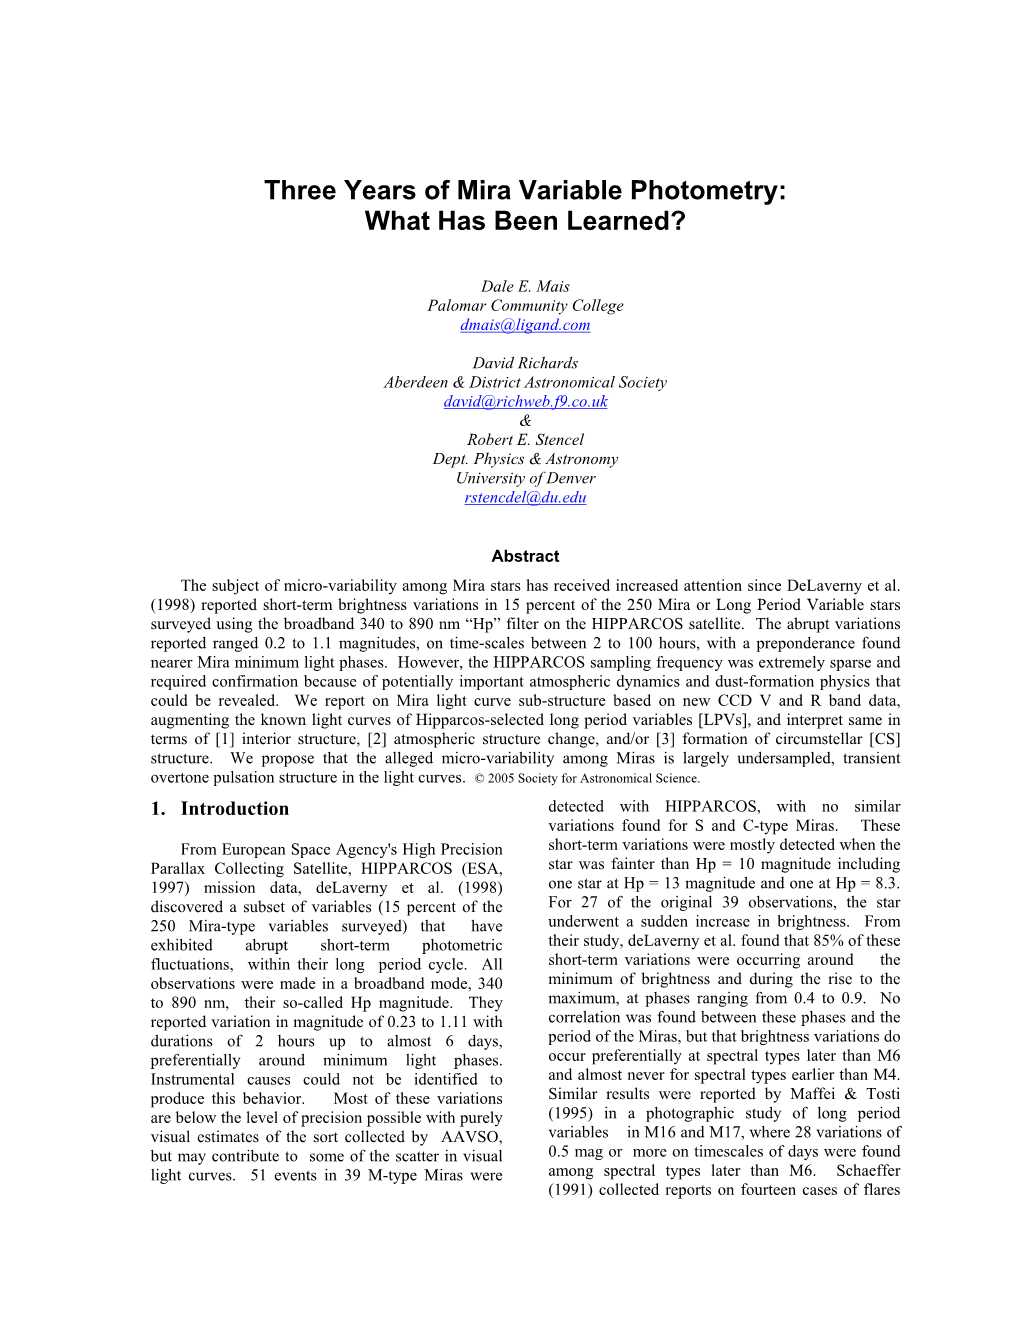 A Paper for the Society for Astronomical Sciences